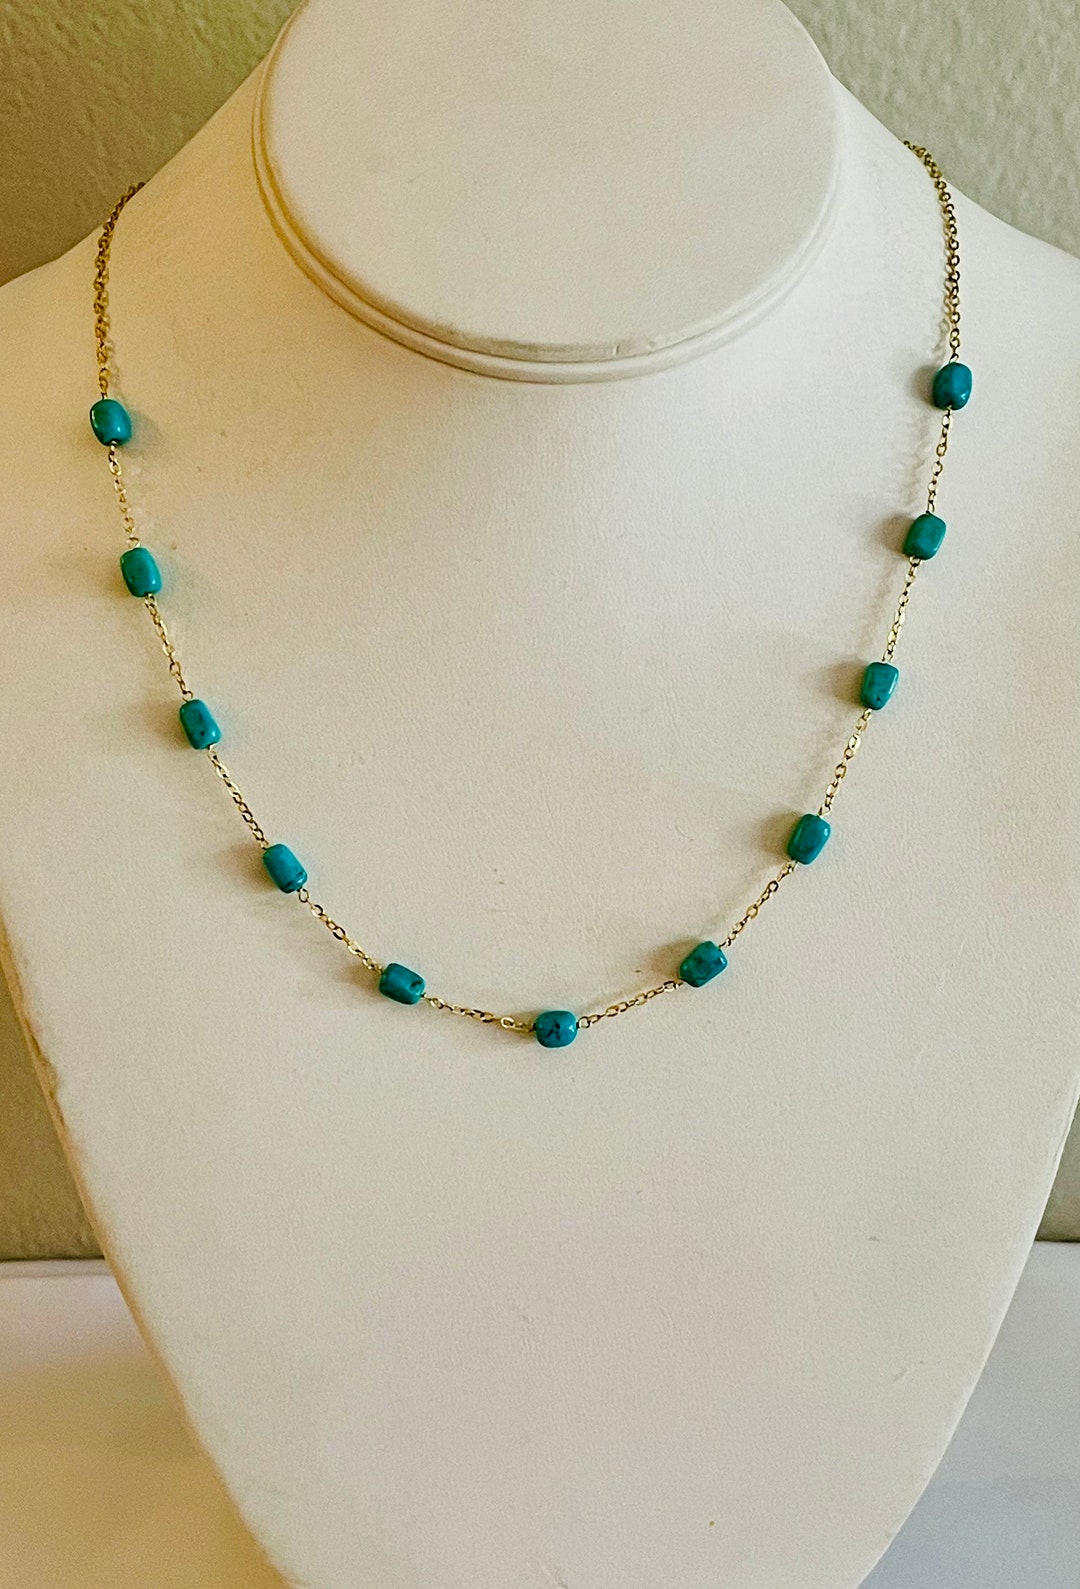 14k Yellow Gold & Turquoise 20 Inch Chain Necklace - Etsy